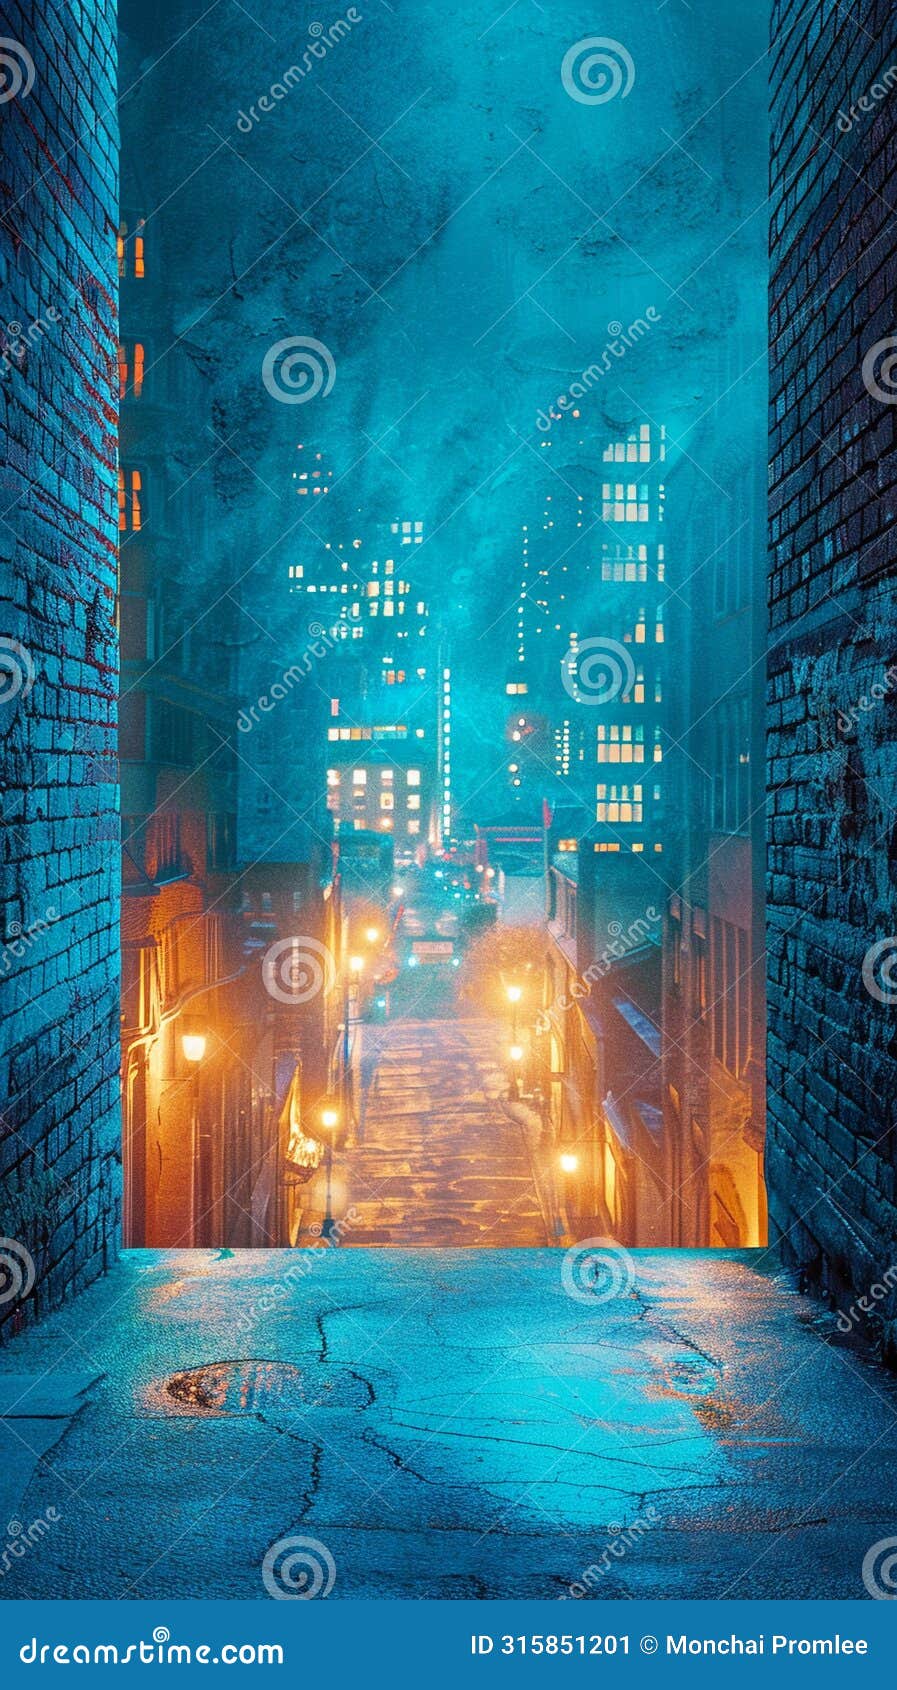 forbidden alley in a neon city, dripping with oil spills, shadowy figures lurking, cyberpunk vibes